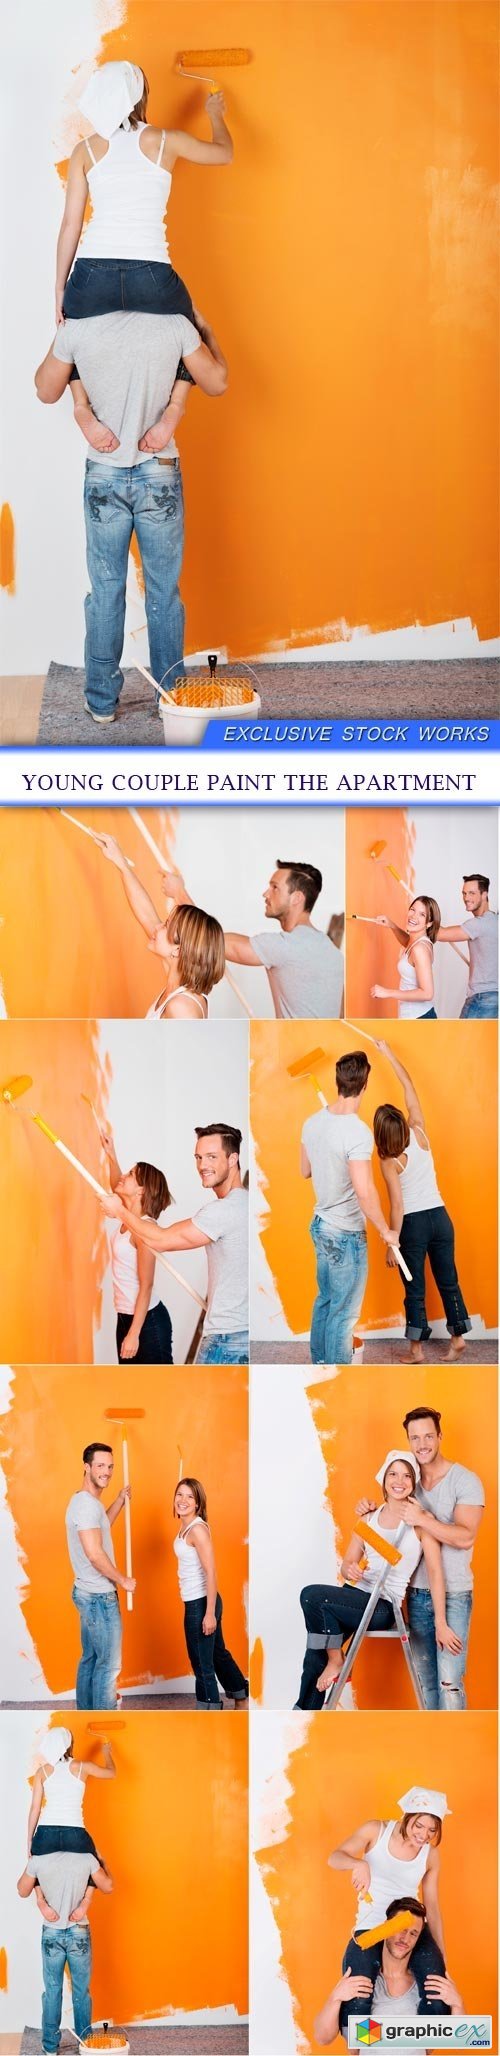 Young couple paint the apartment 8X JPEG